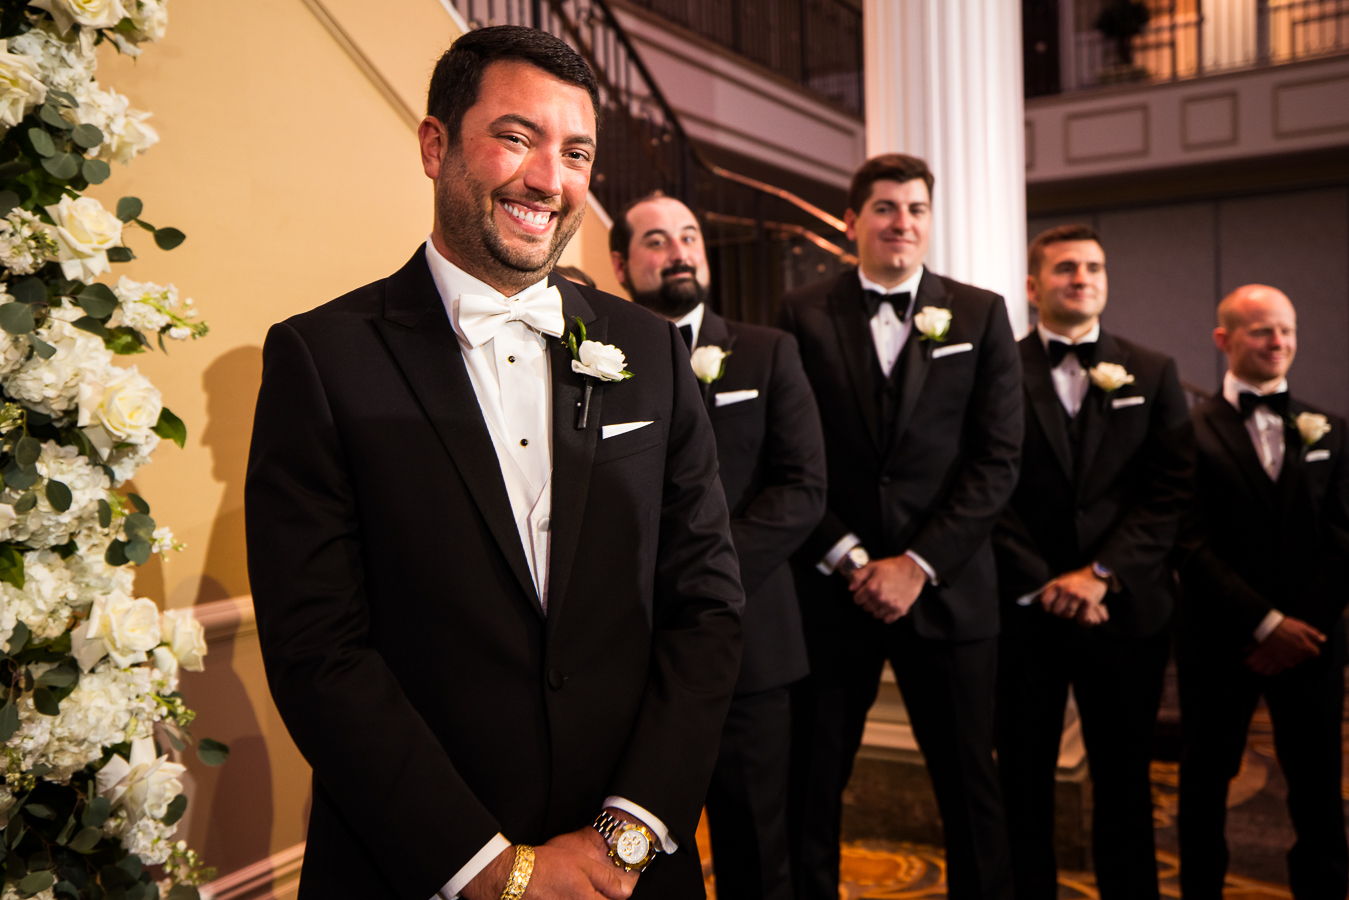 palace wedding photographer, lisa rhinehart, captures this authentic moment of the groom as he smiles so big as he sees his bride walking down the aisle towards him during this nj wedding ceremony 